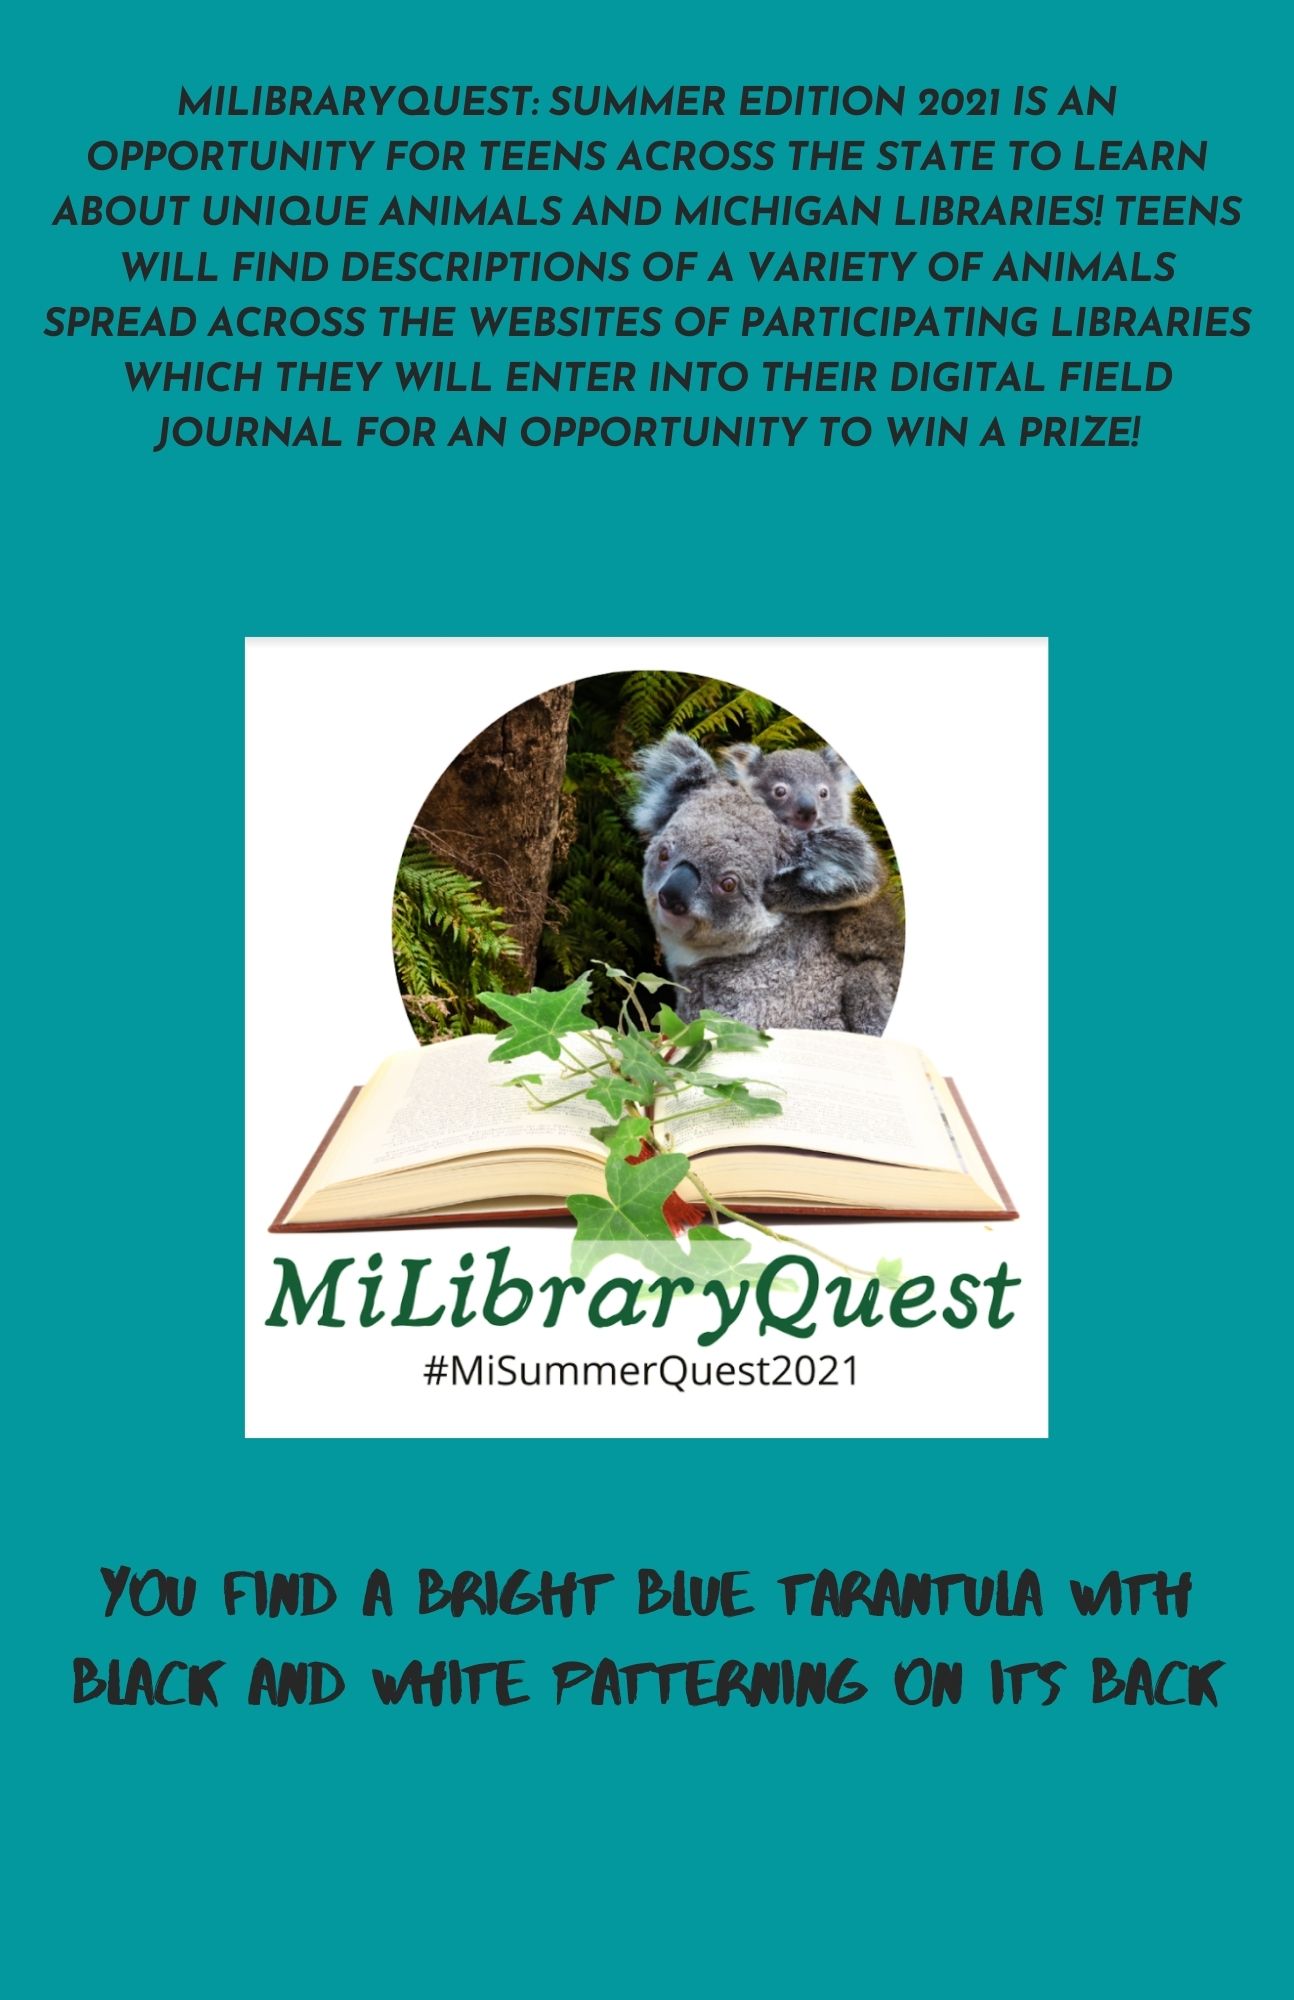 MiLibraryQuest Summer Edition 2021 is an opportunity for teens across the state to learn about unique animals and Michigan libraries! Teens will find descriptions of a variety of animals spread across the websi.jpg